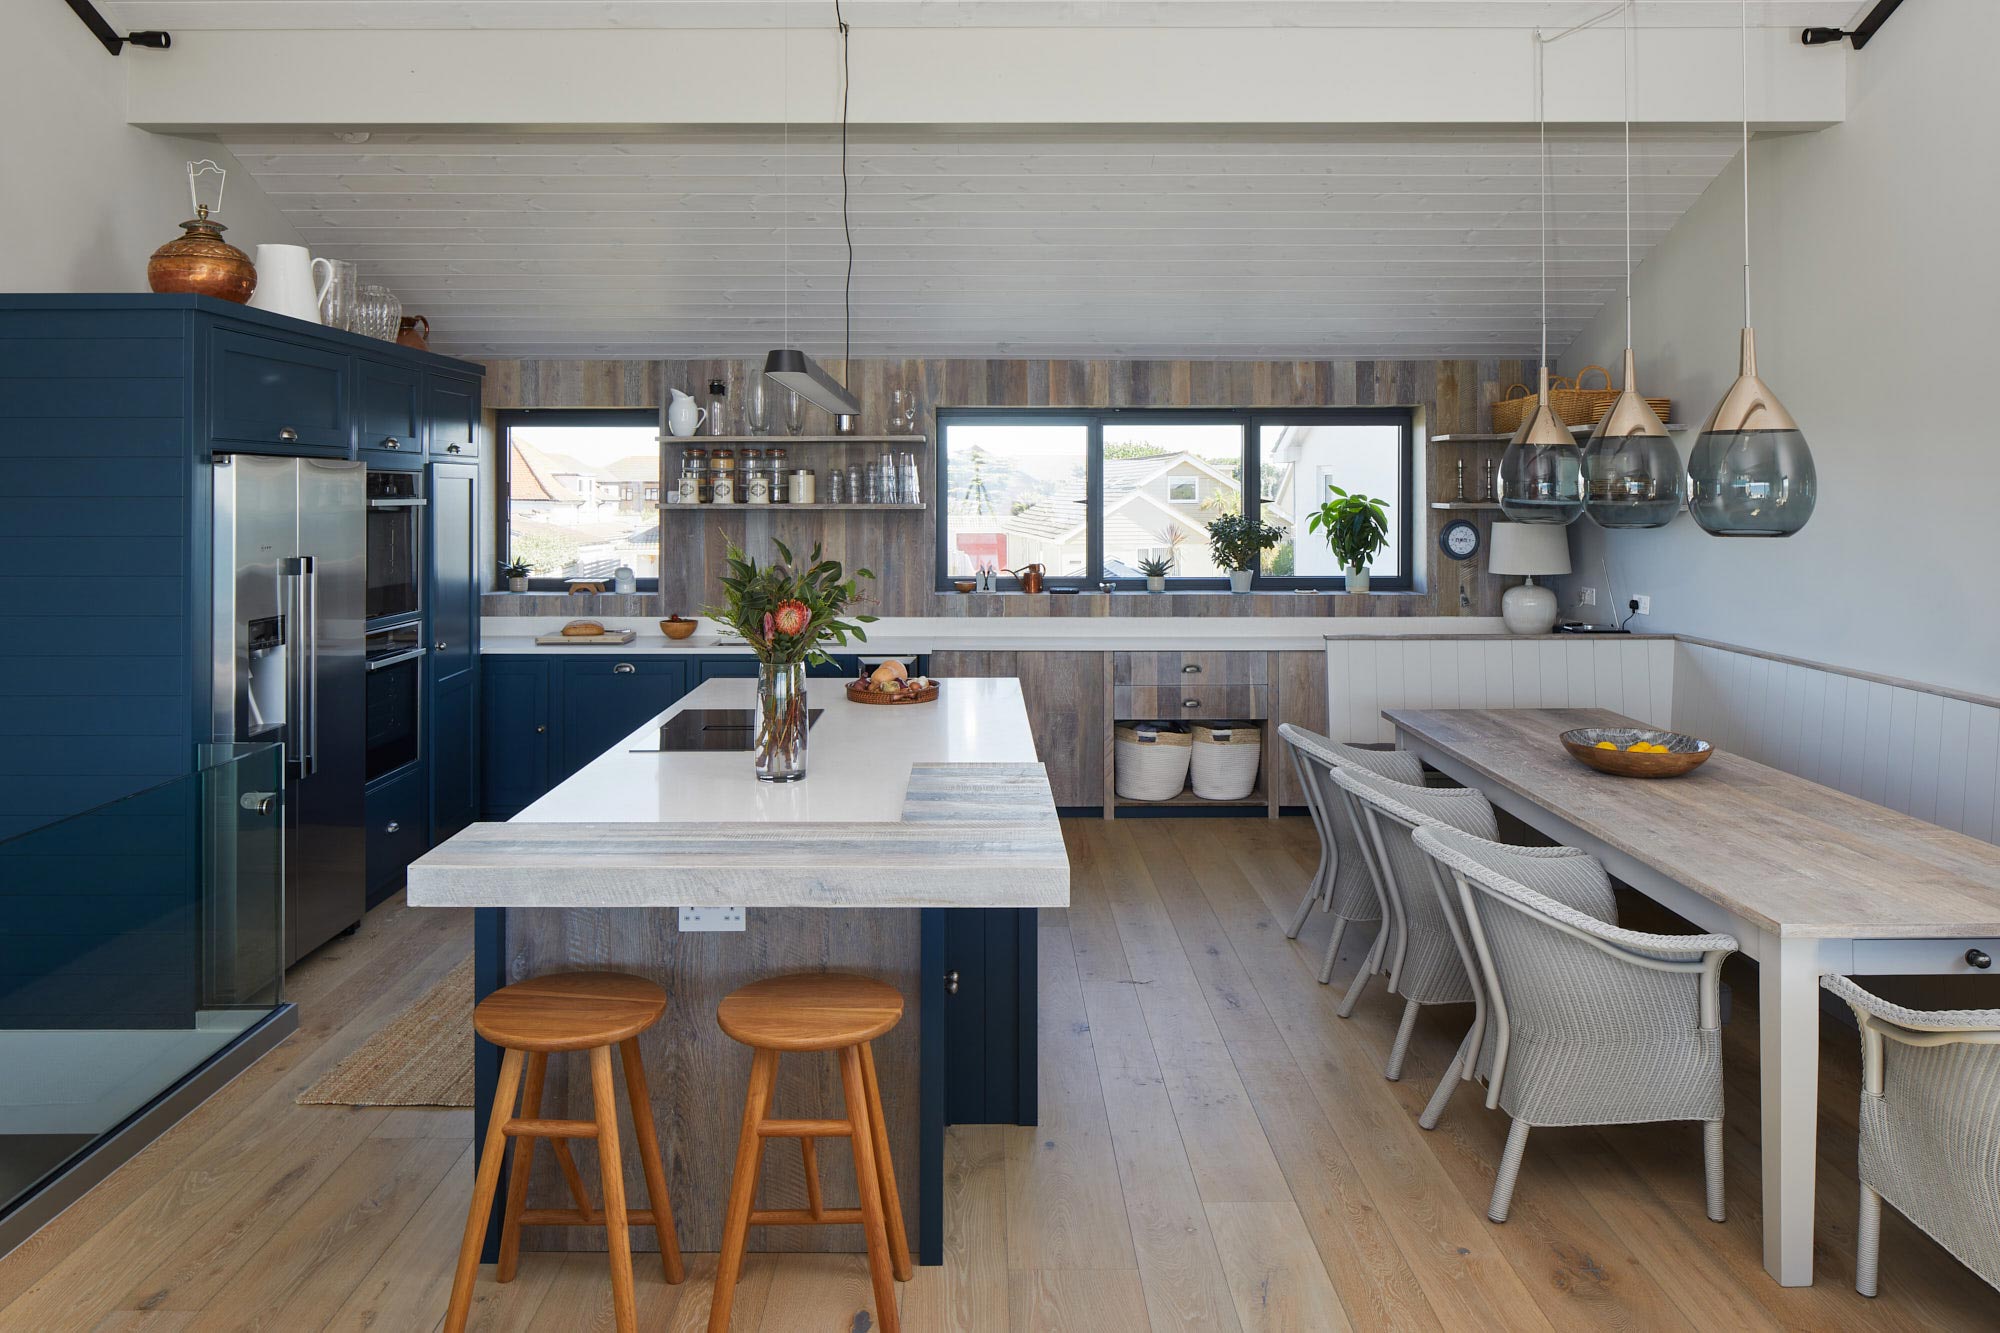 Open plan kitchen cladded in reclaimed timber